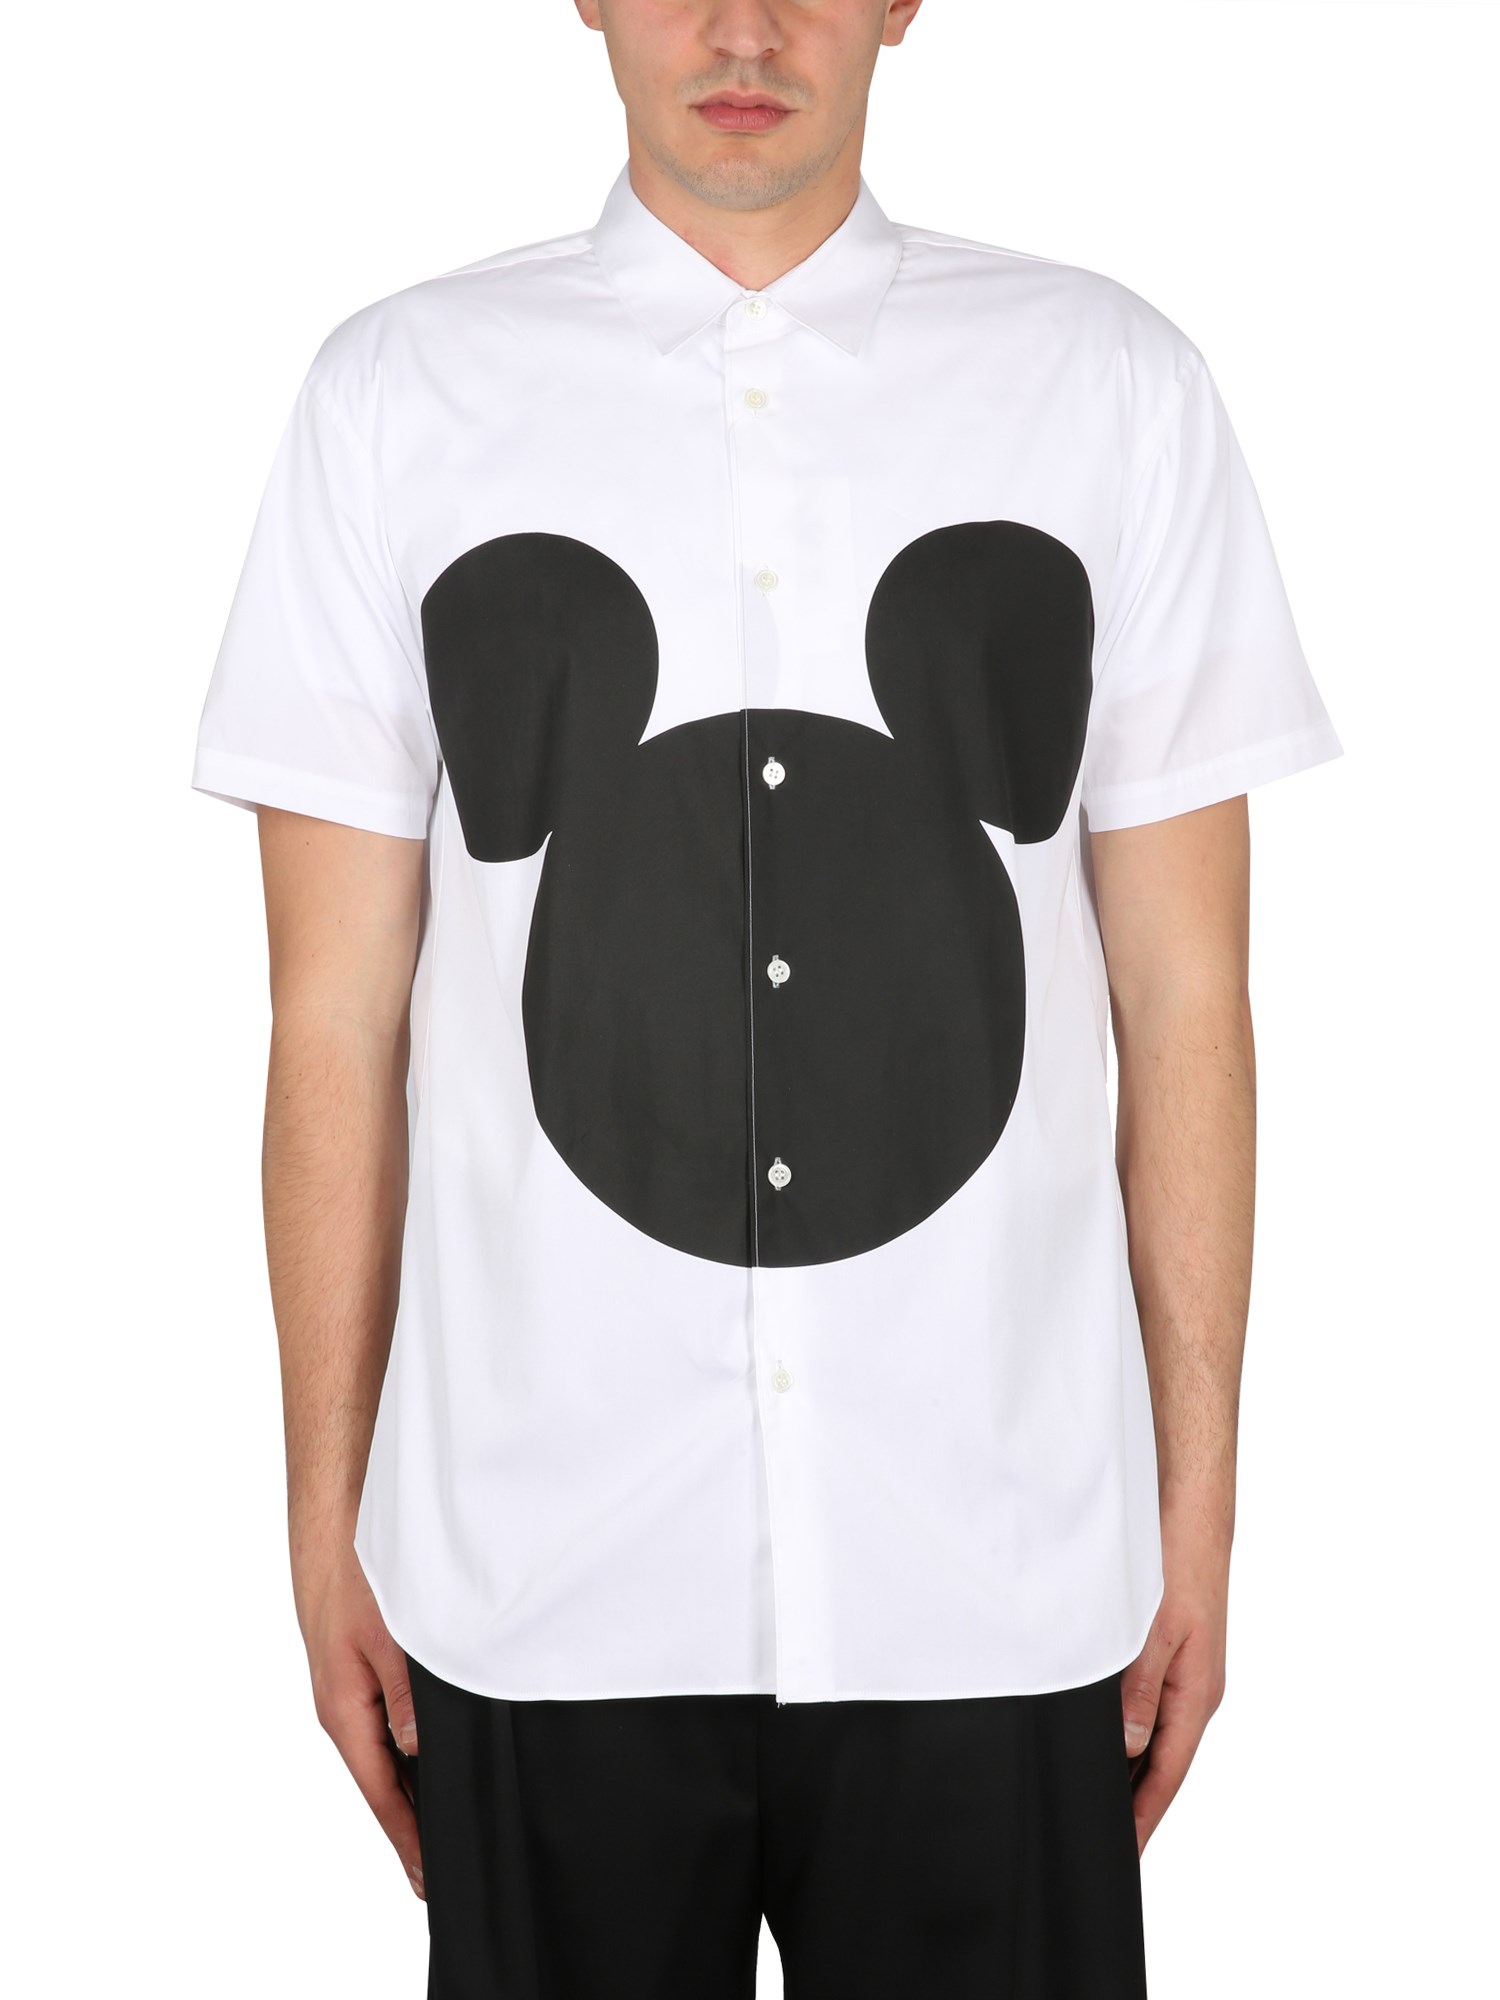 comme des garcons shirt mickey mouse shirt